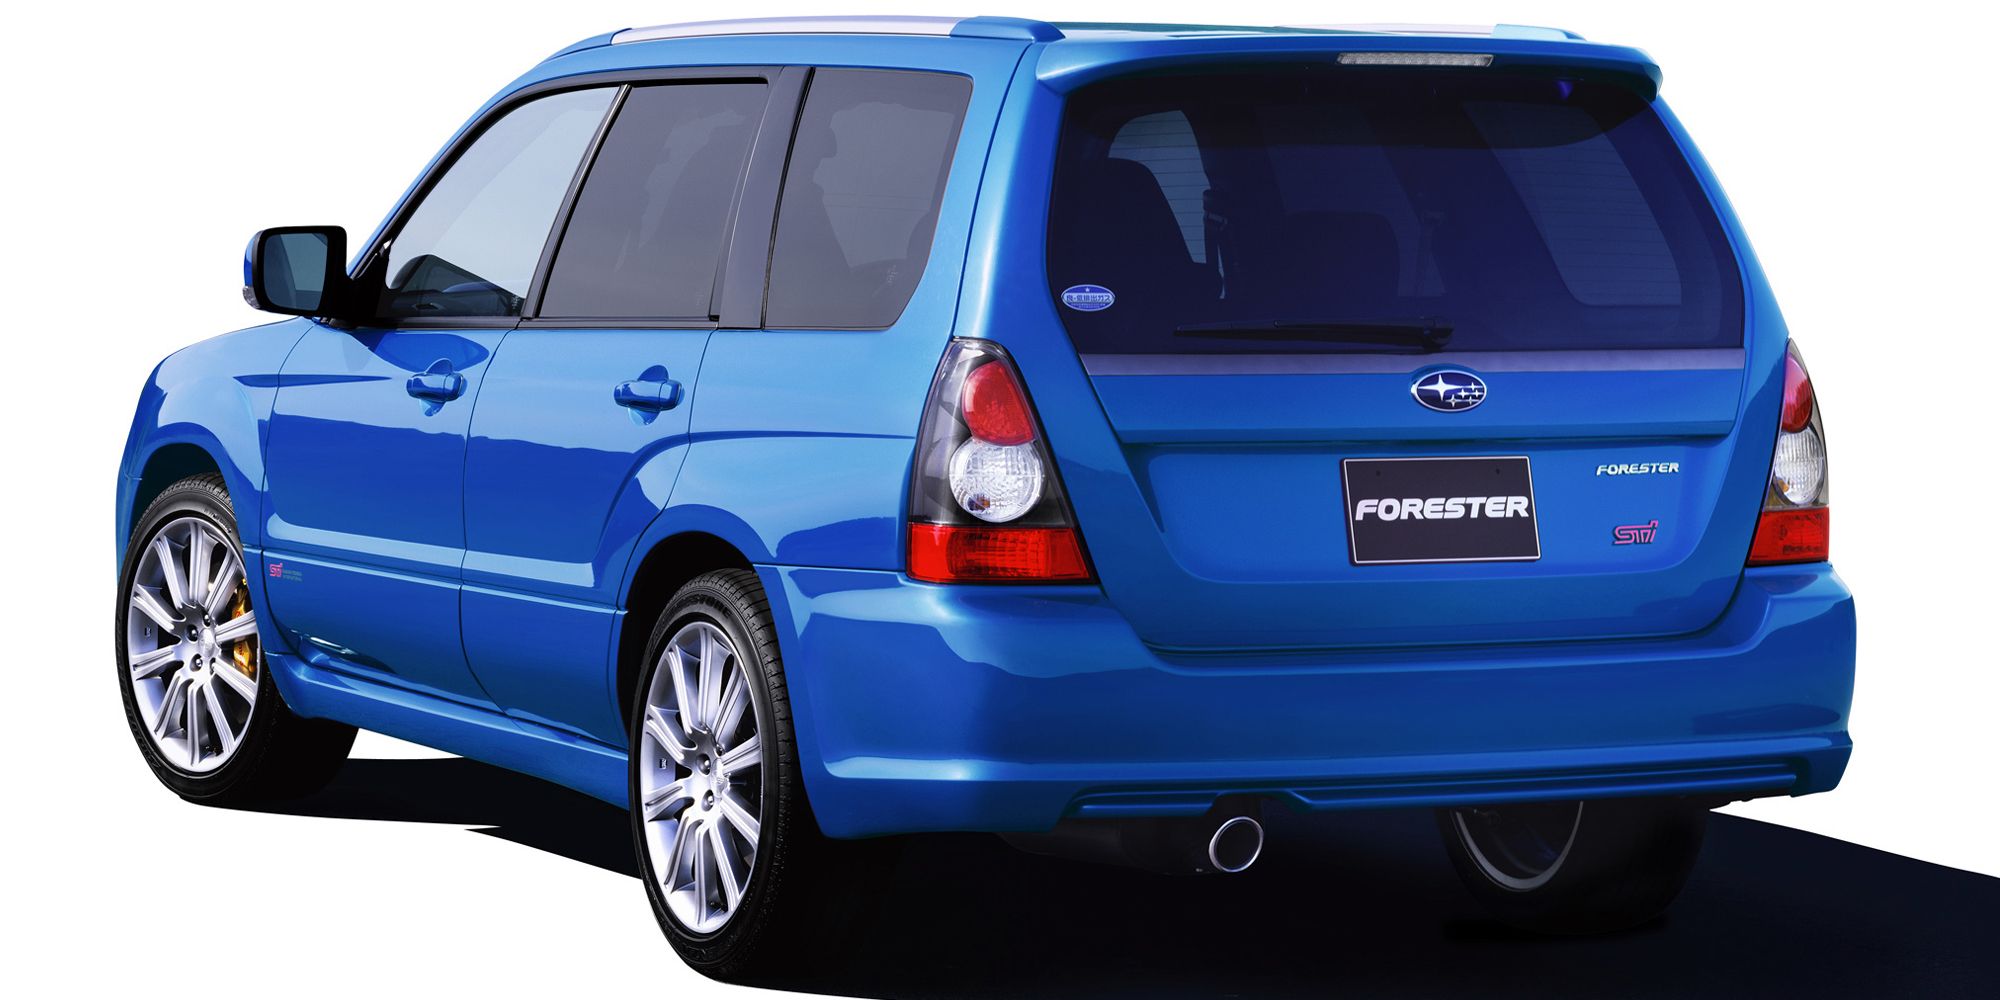 The rear of the Forester STI